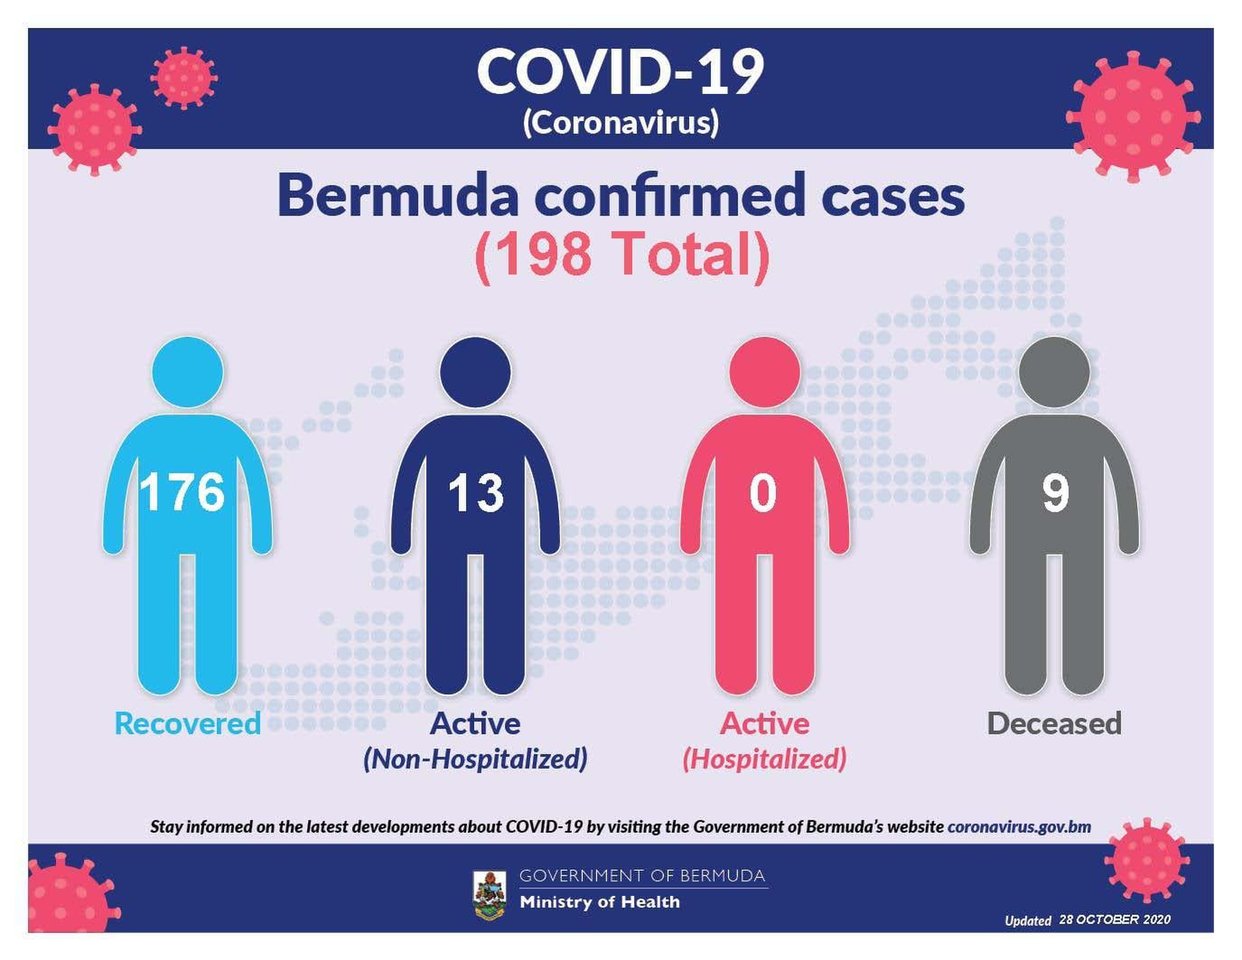 Four new COVID-19 reported in Bermuda, 29 October